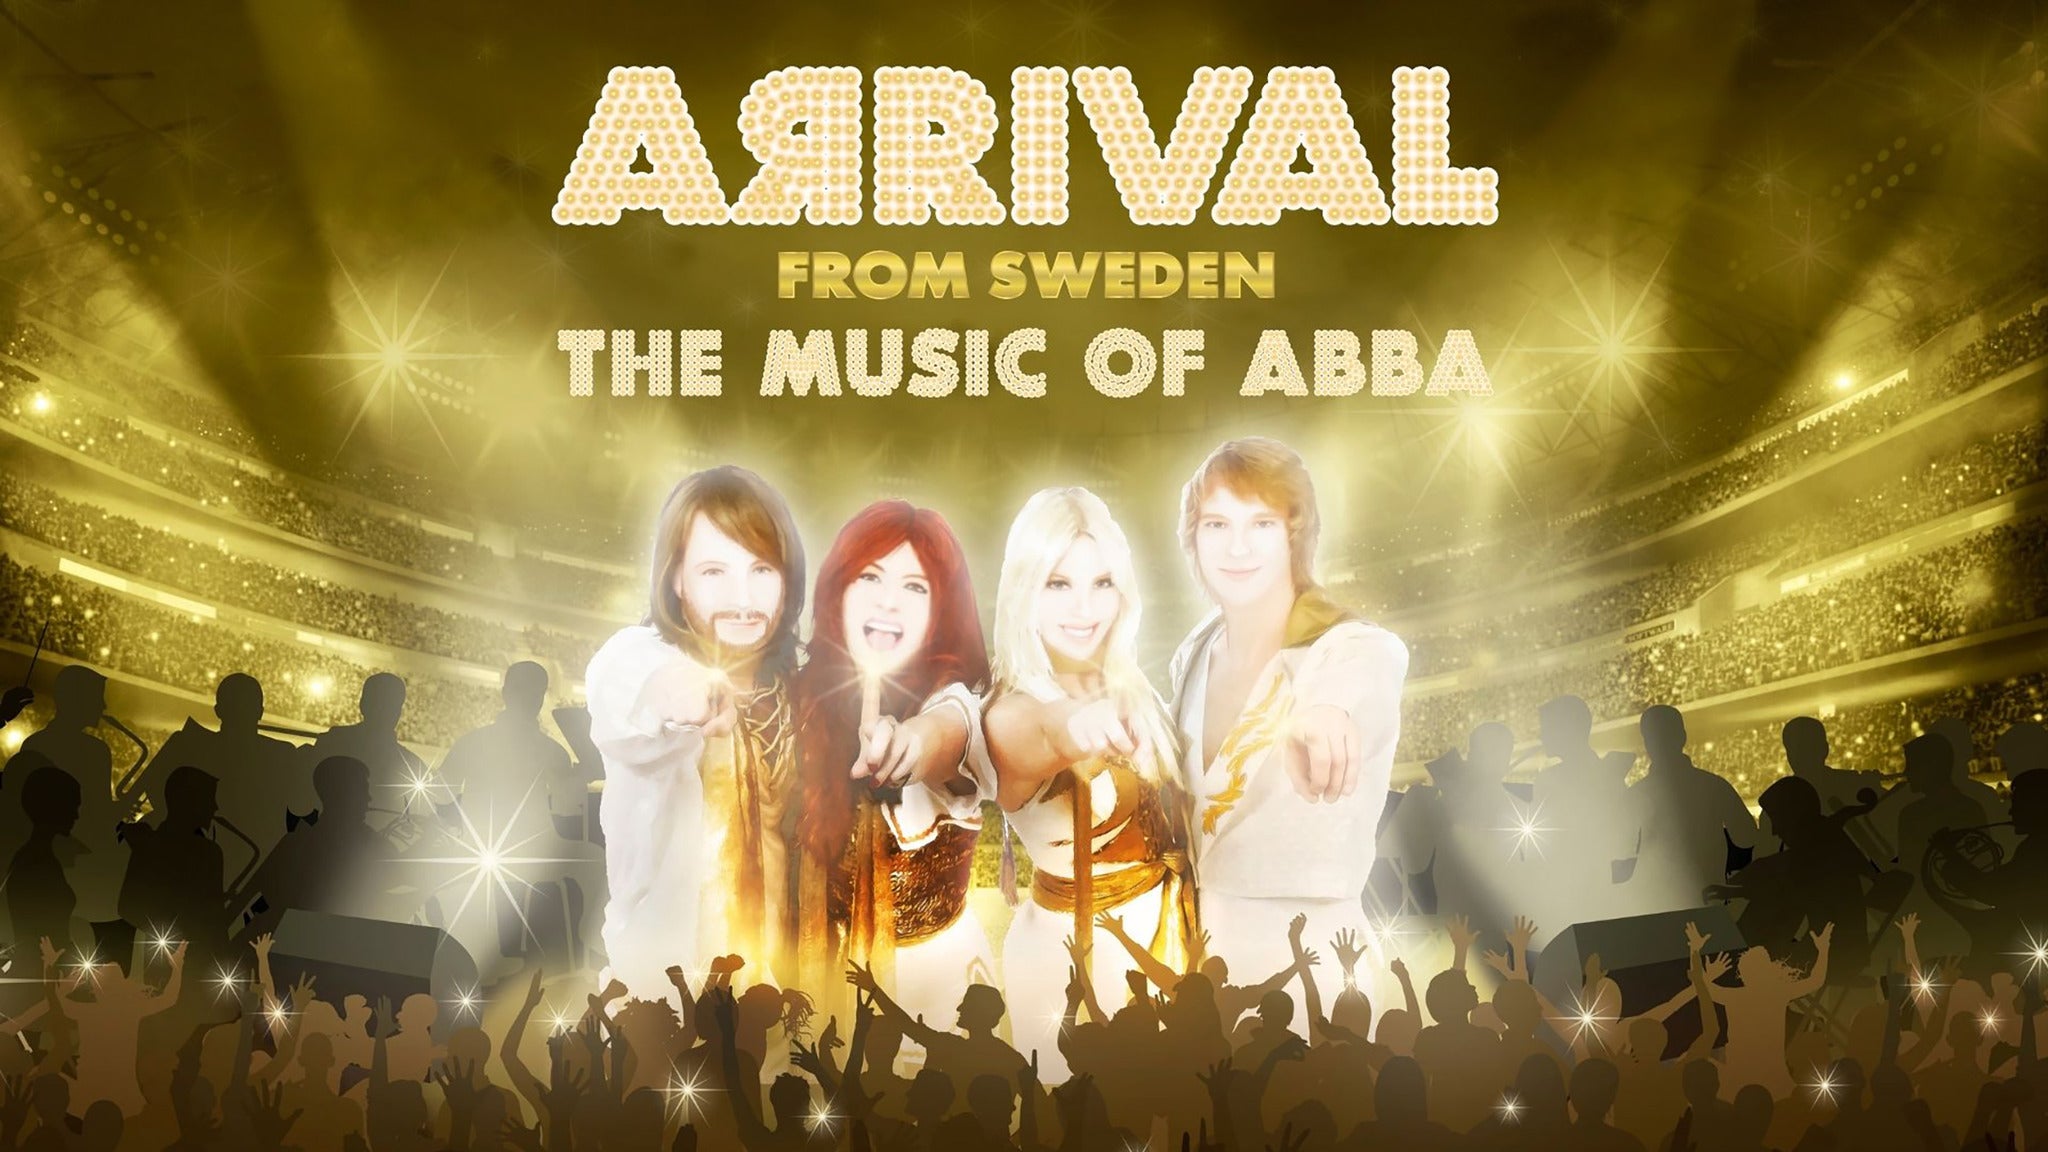 The Music of Abba